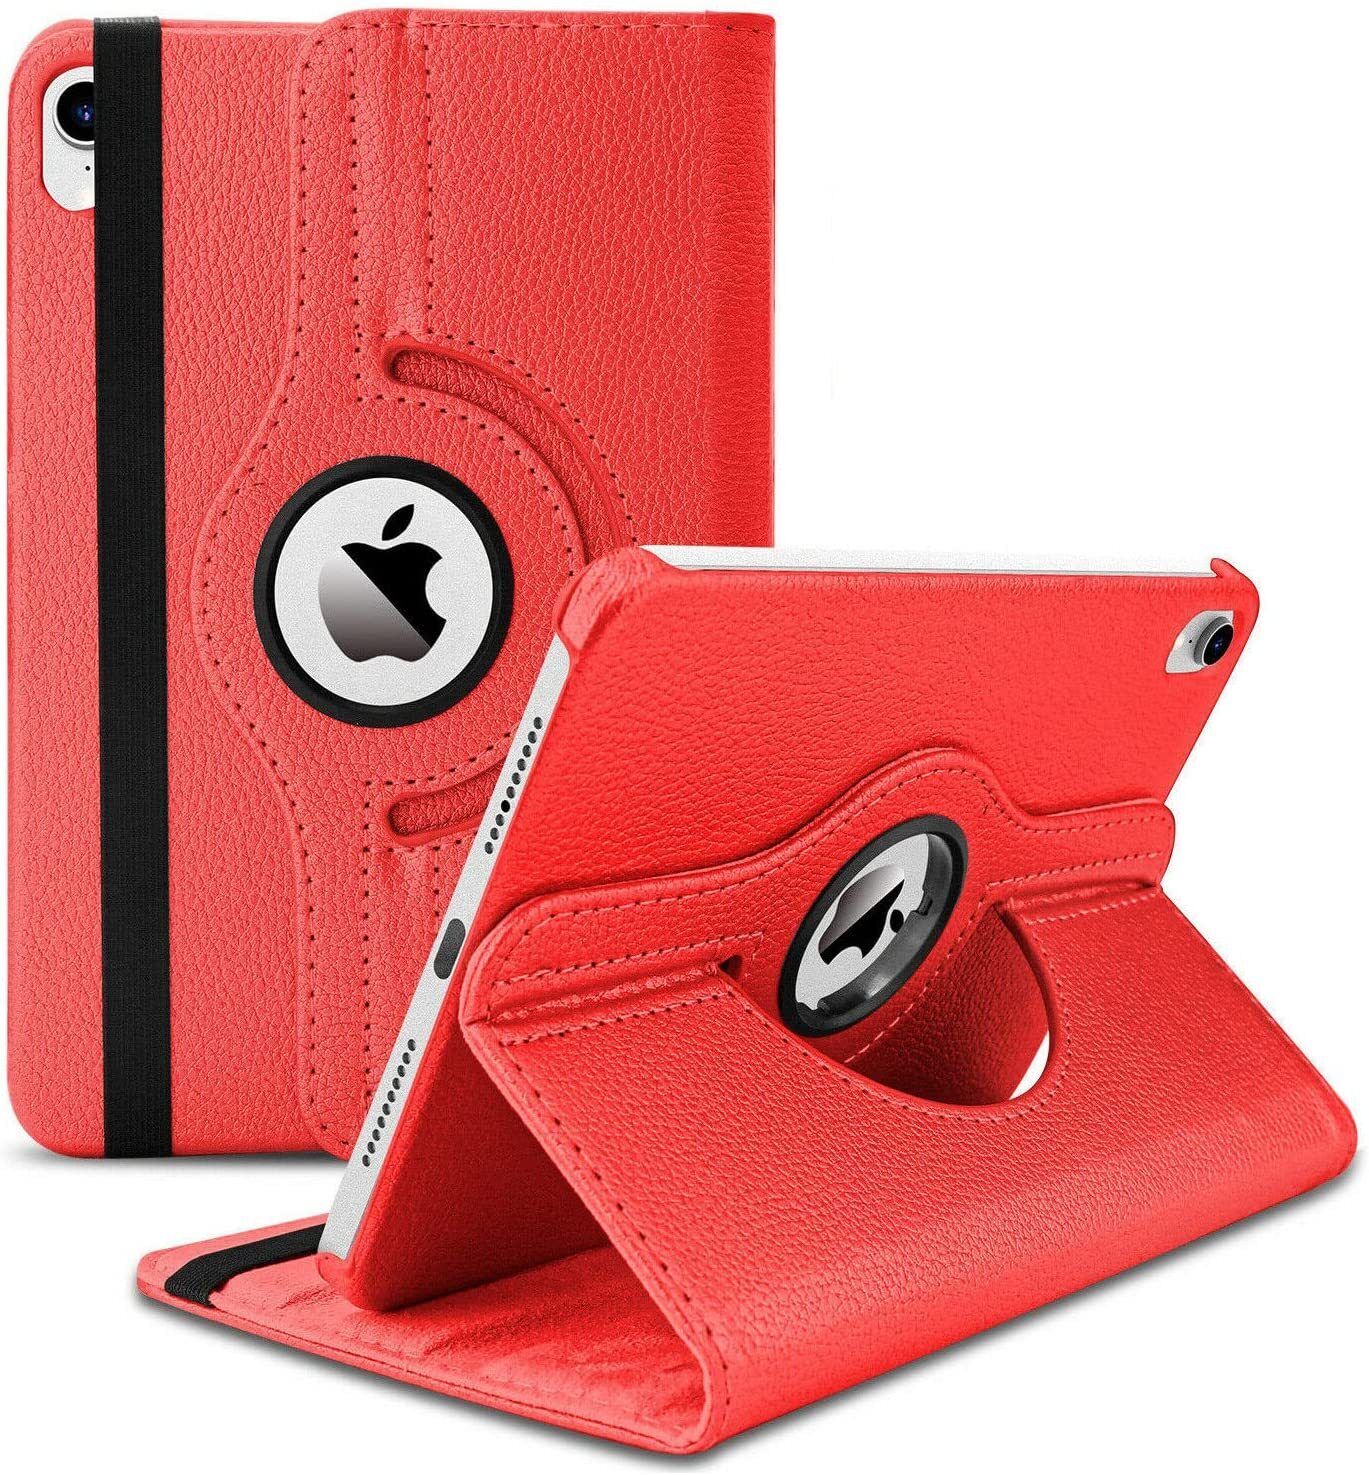 For Apple iPad 9th Gen 10.2 2021 360 Degree Red Flip PU Leather Smart Case Cover